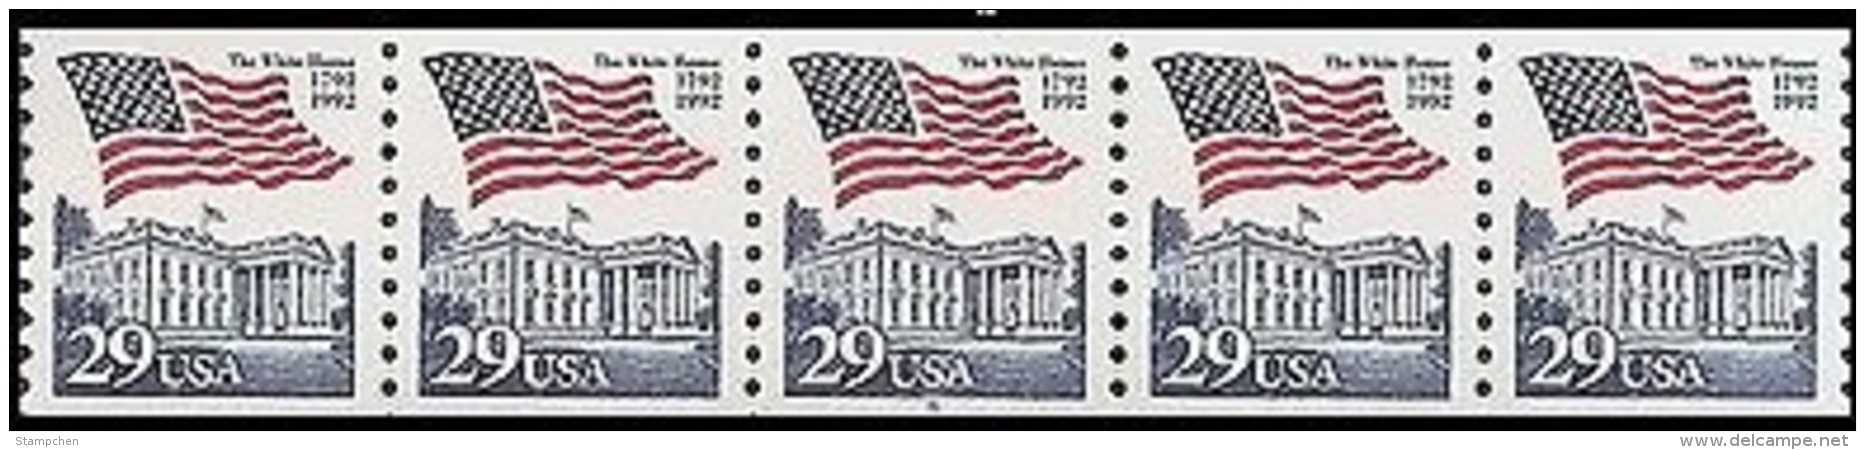 1992 USA Flag Over The White House PNC5 Plate Number Coil Strip PI #7 Sc#2609 Post - Rollen (Plaatnummers)